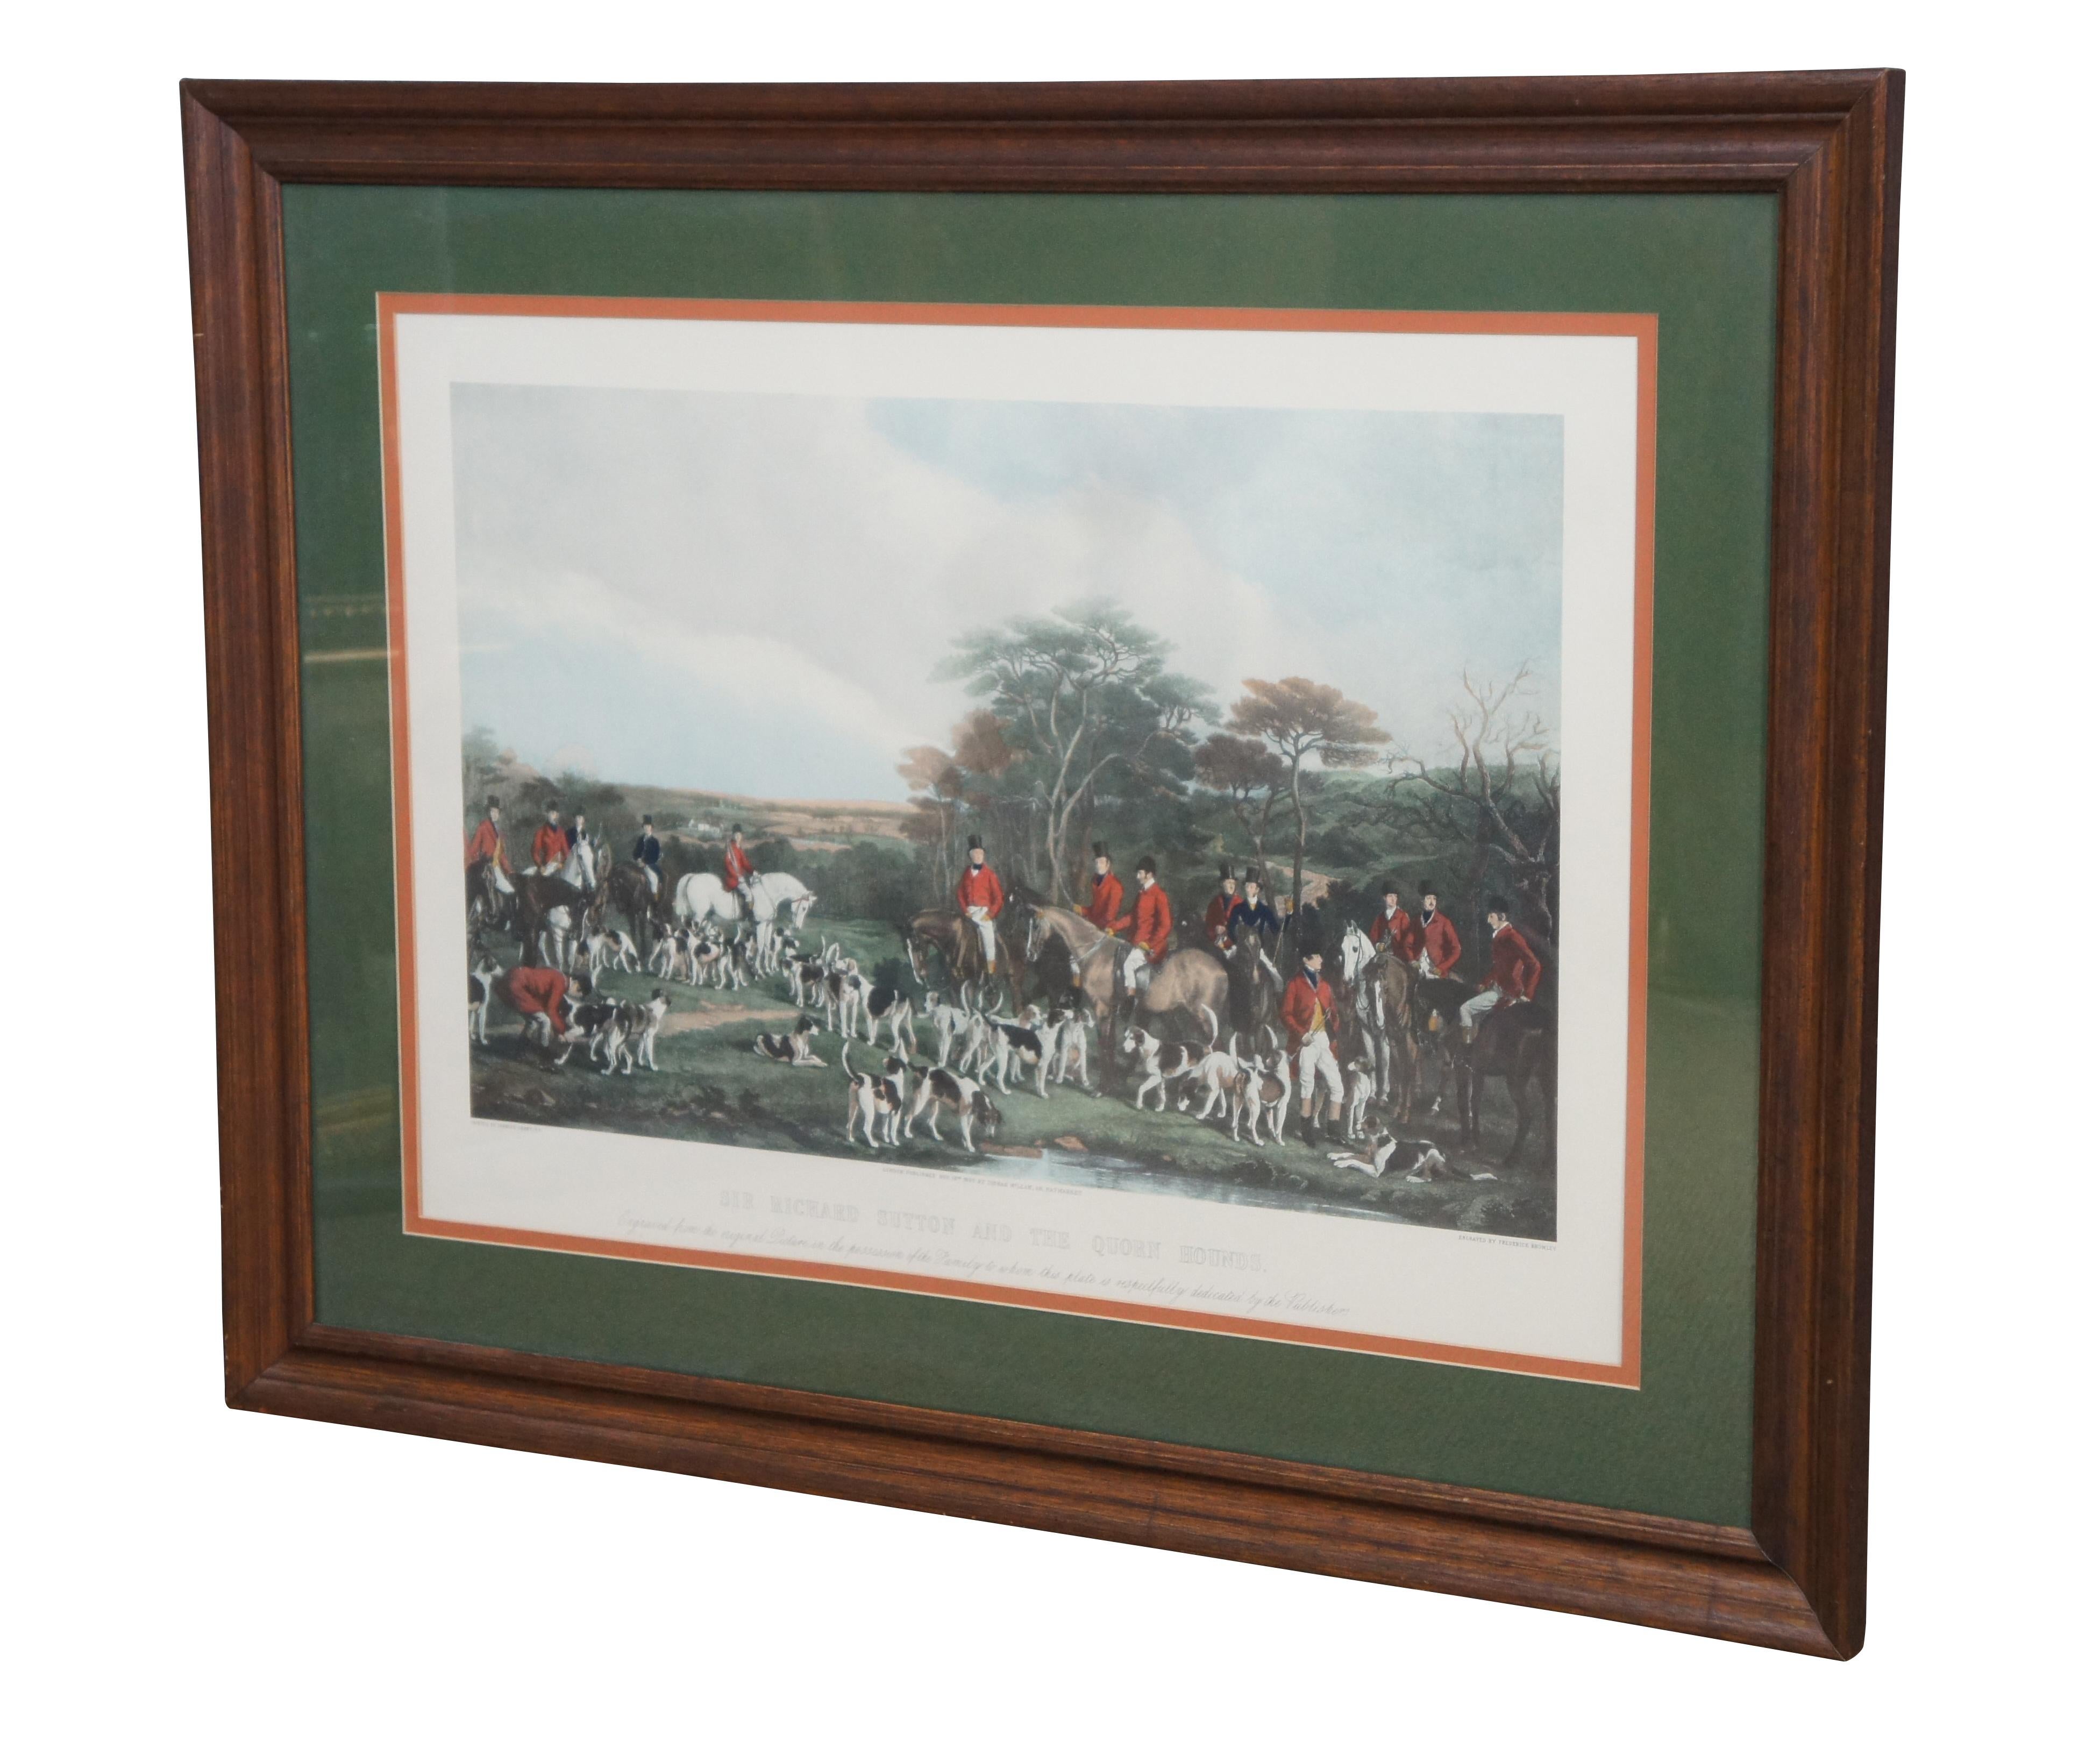 Antique 19th century hand colored engraving titled Sir Richard Sutton and the Quorn Hounds, original painted by Francis Grant, engraved by Frederick Bromley, London published 1855 by Thomas McClean. Features an English equestrian landscape fox hunt